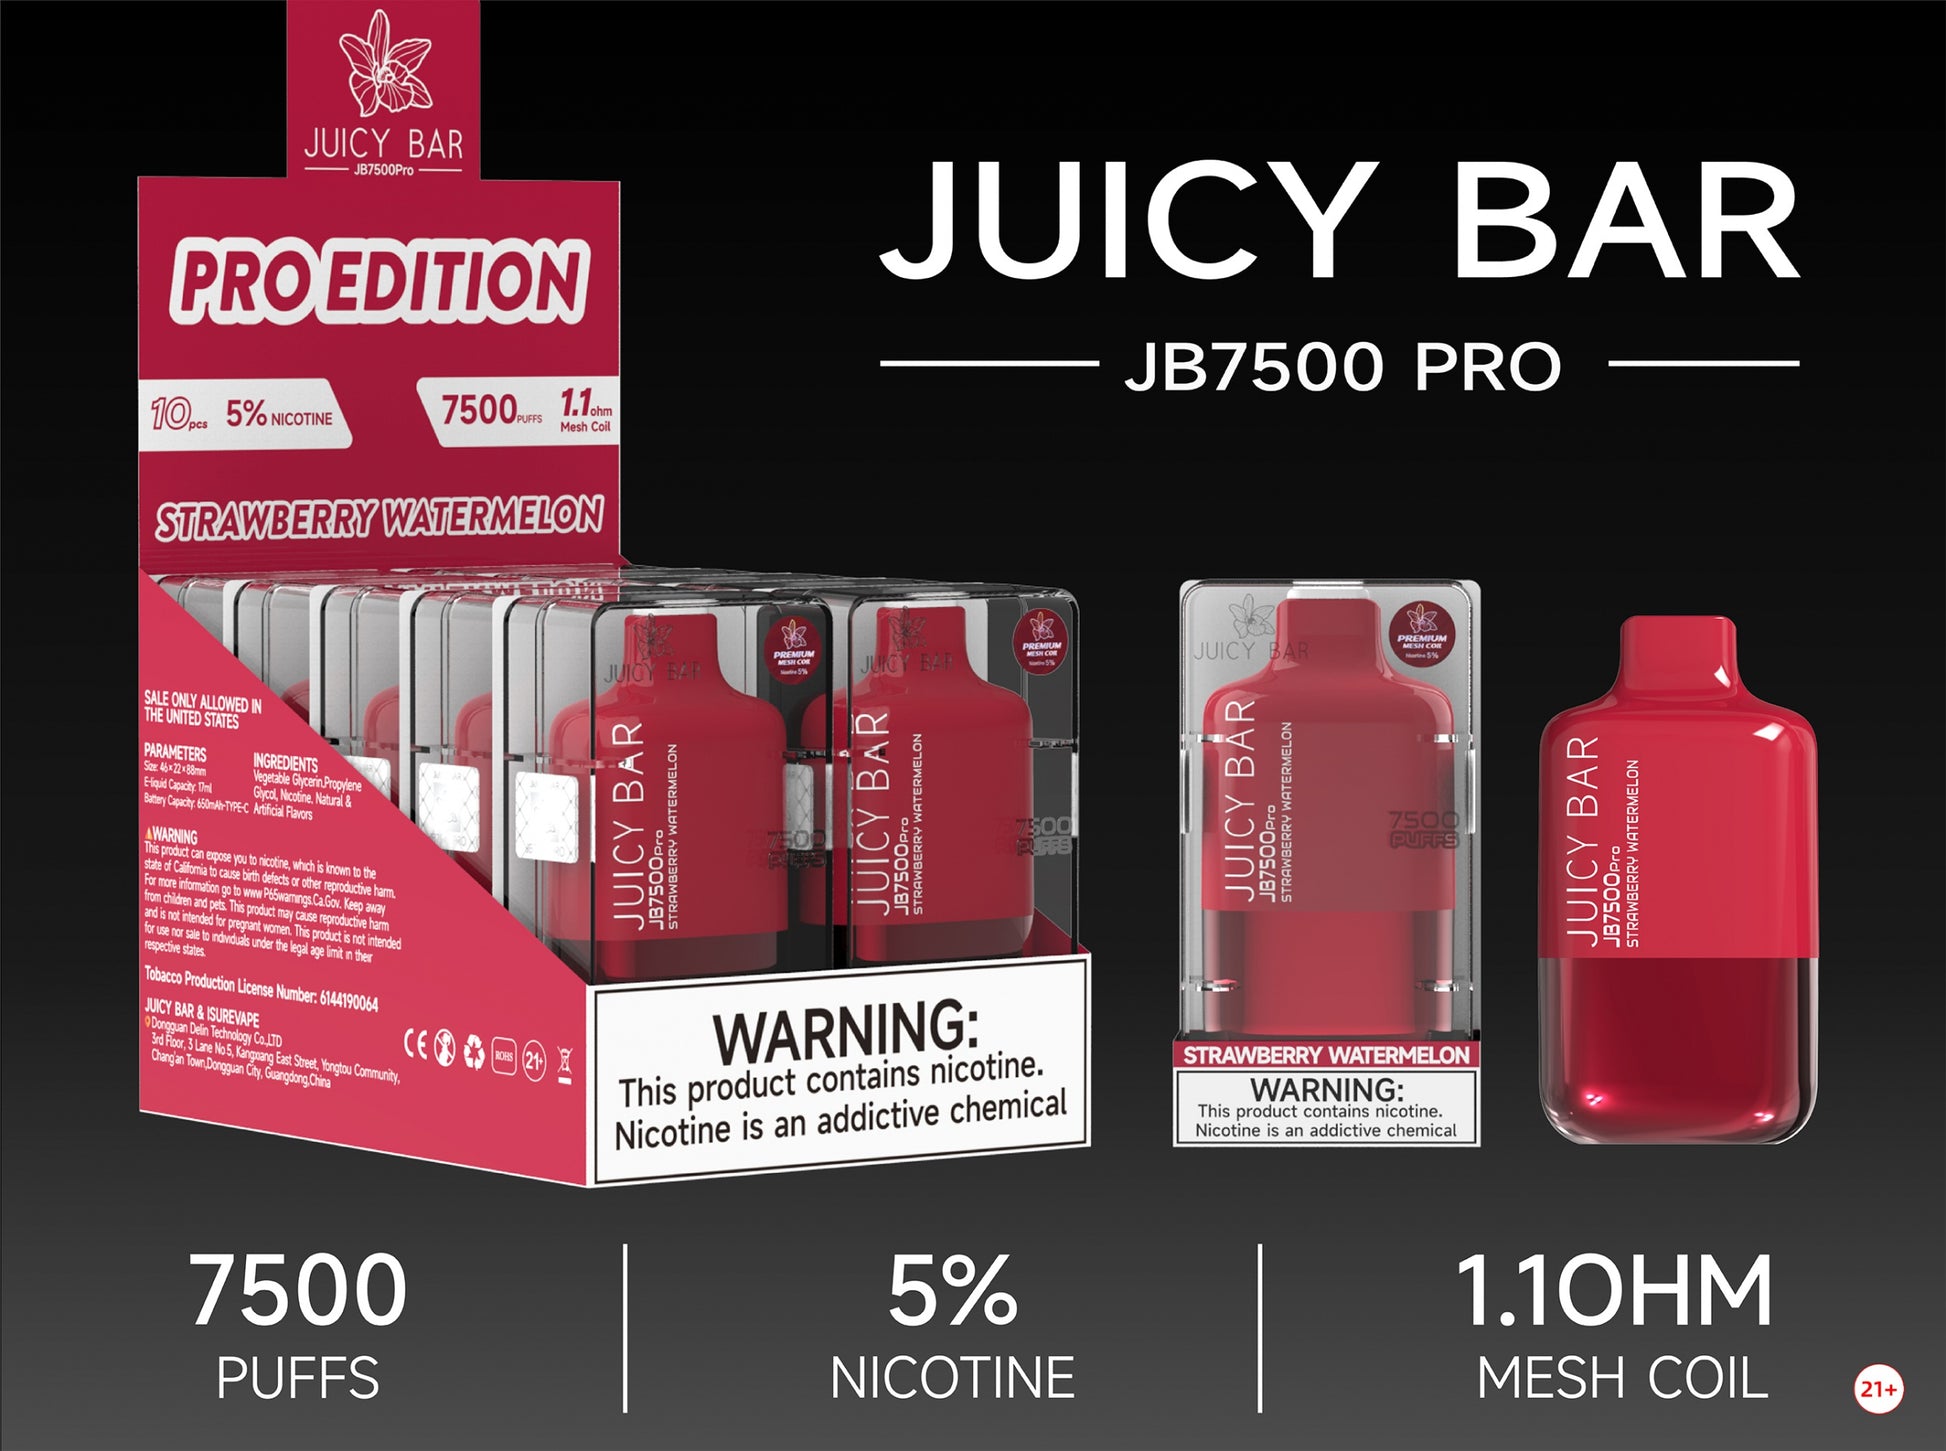 Juicy Bar Pro Edition 7500 Puffs 5% | Strawberry Watermelon with packaging